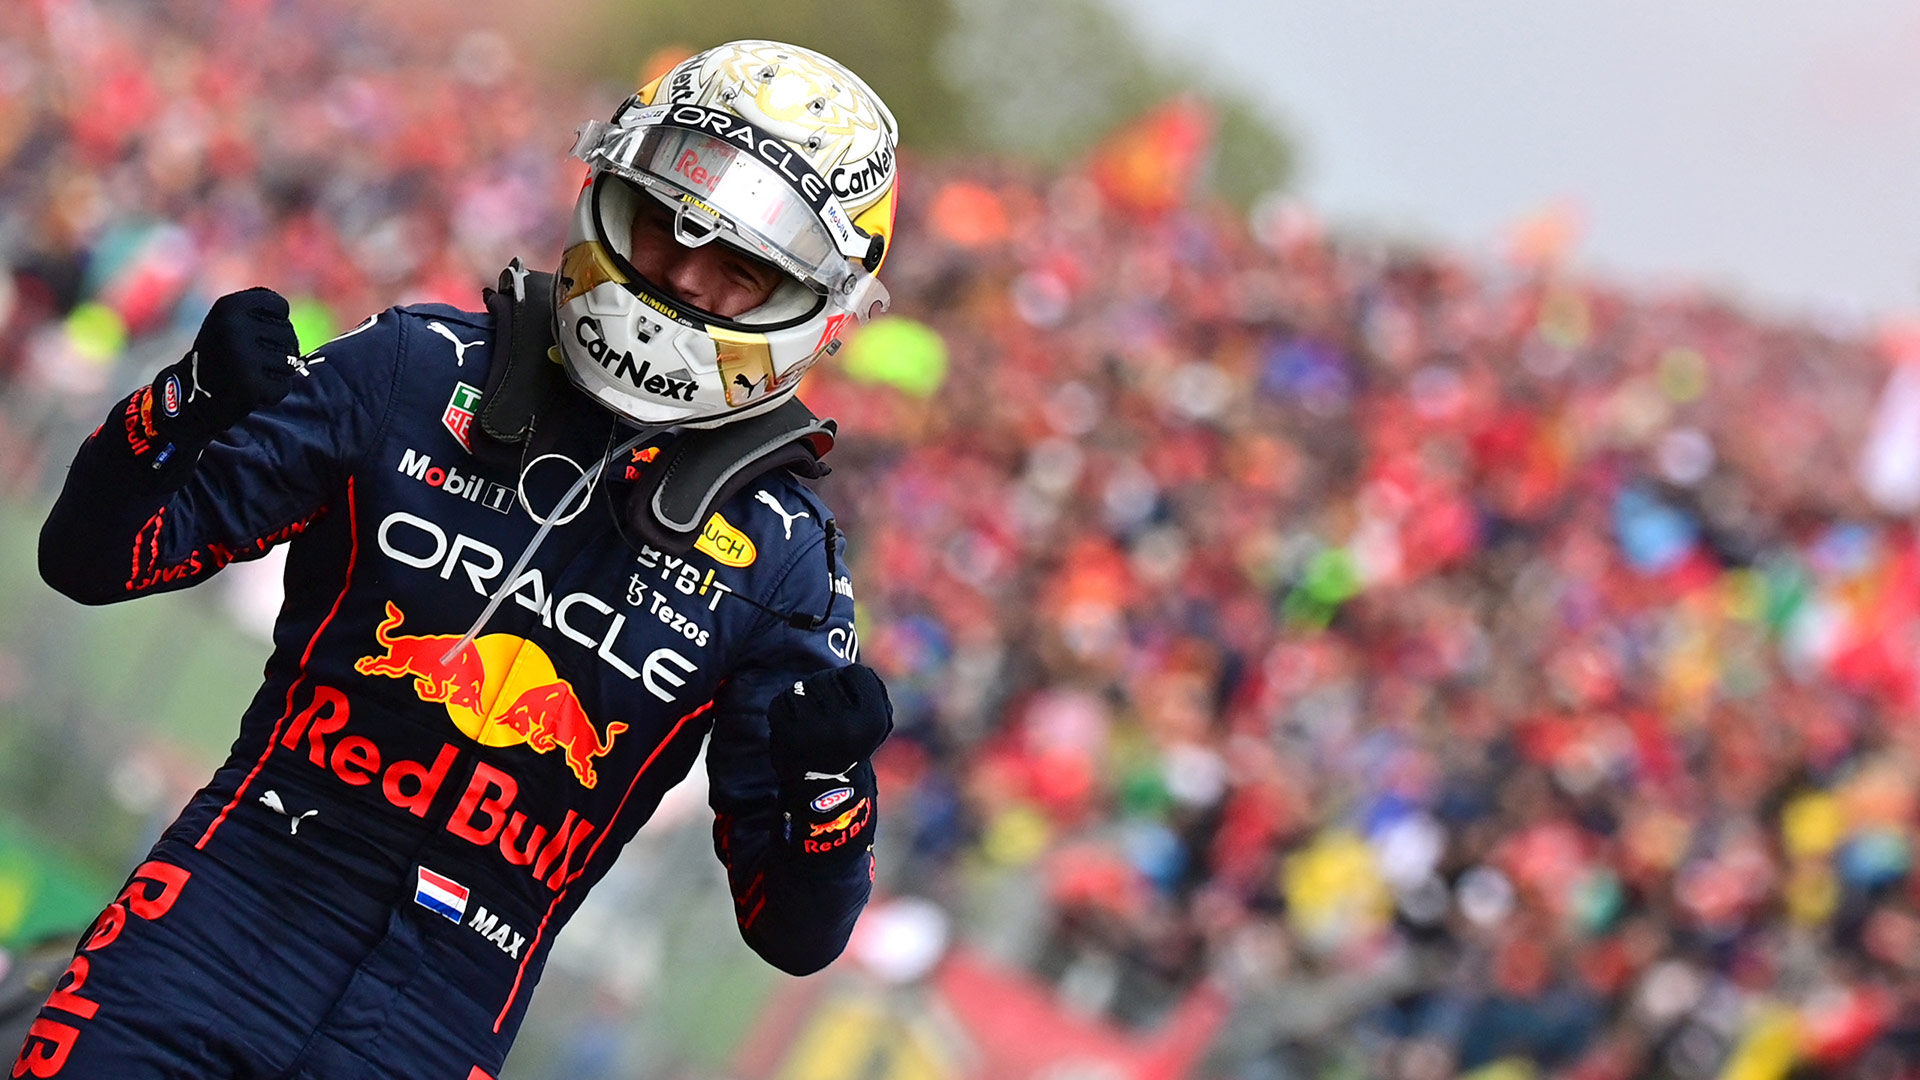 Red Bull's Max Verstappen reacts after winning the Emilia Romagna F1 Grand Prix in April 2022.